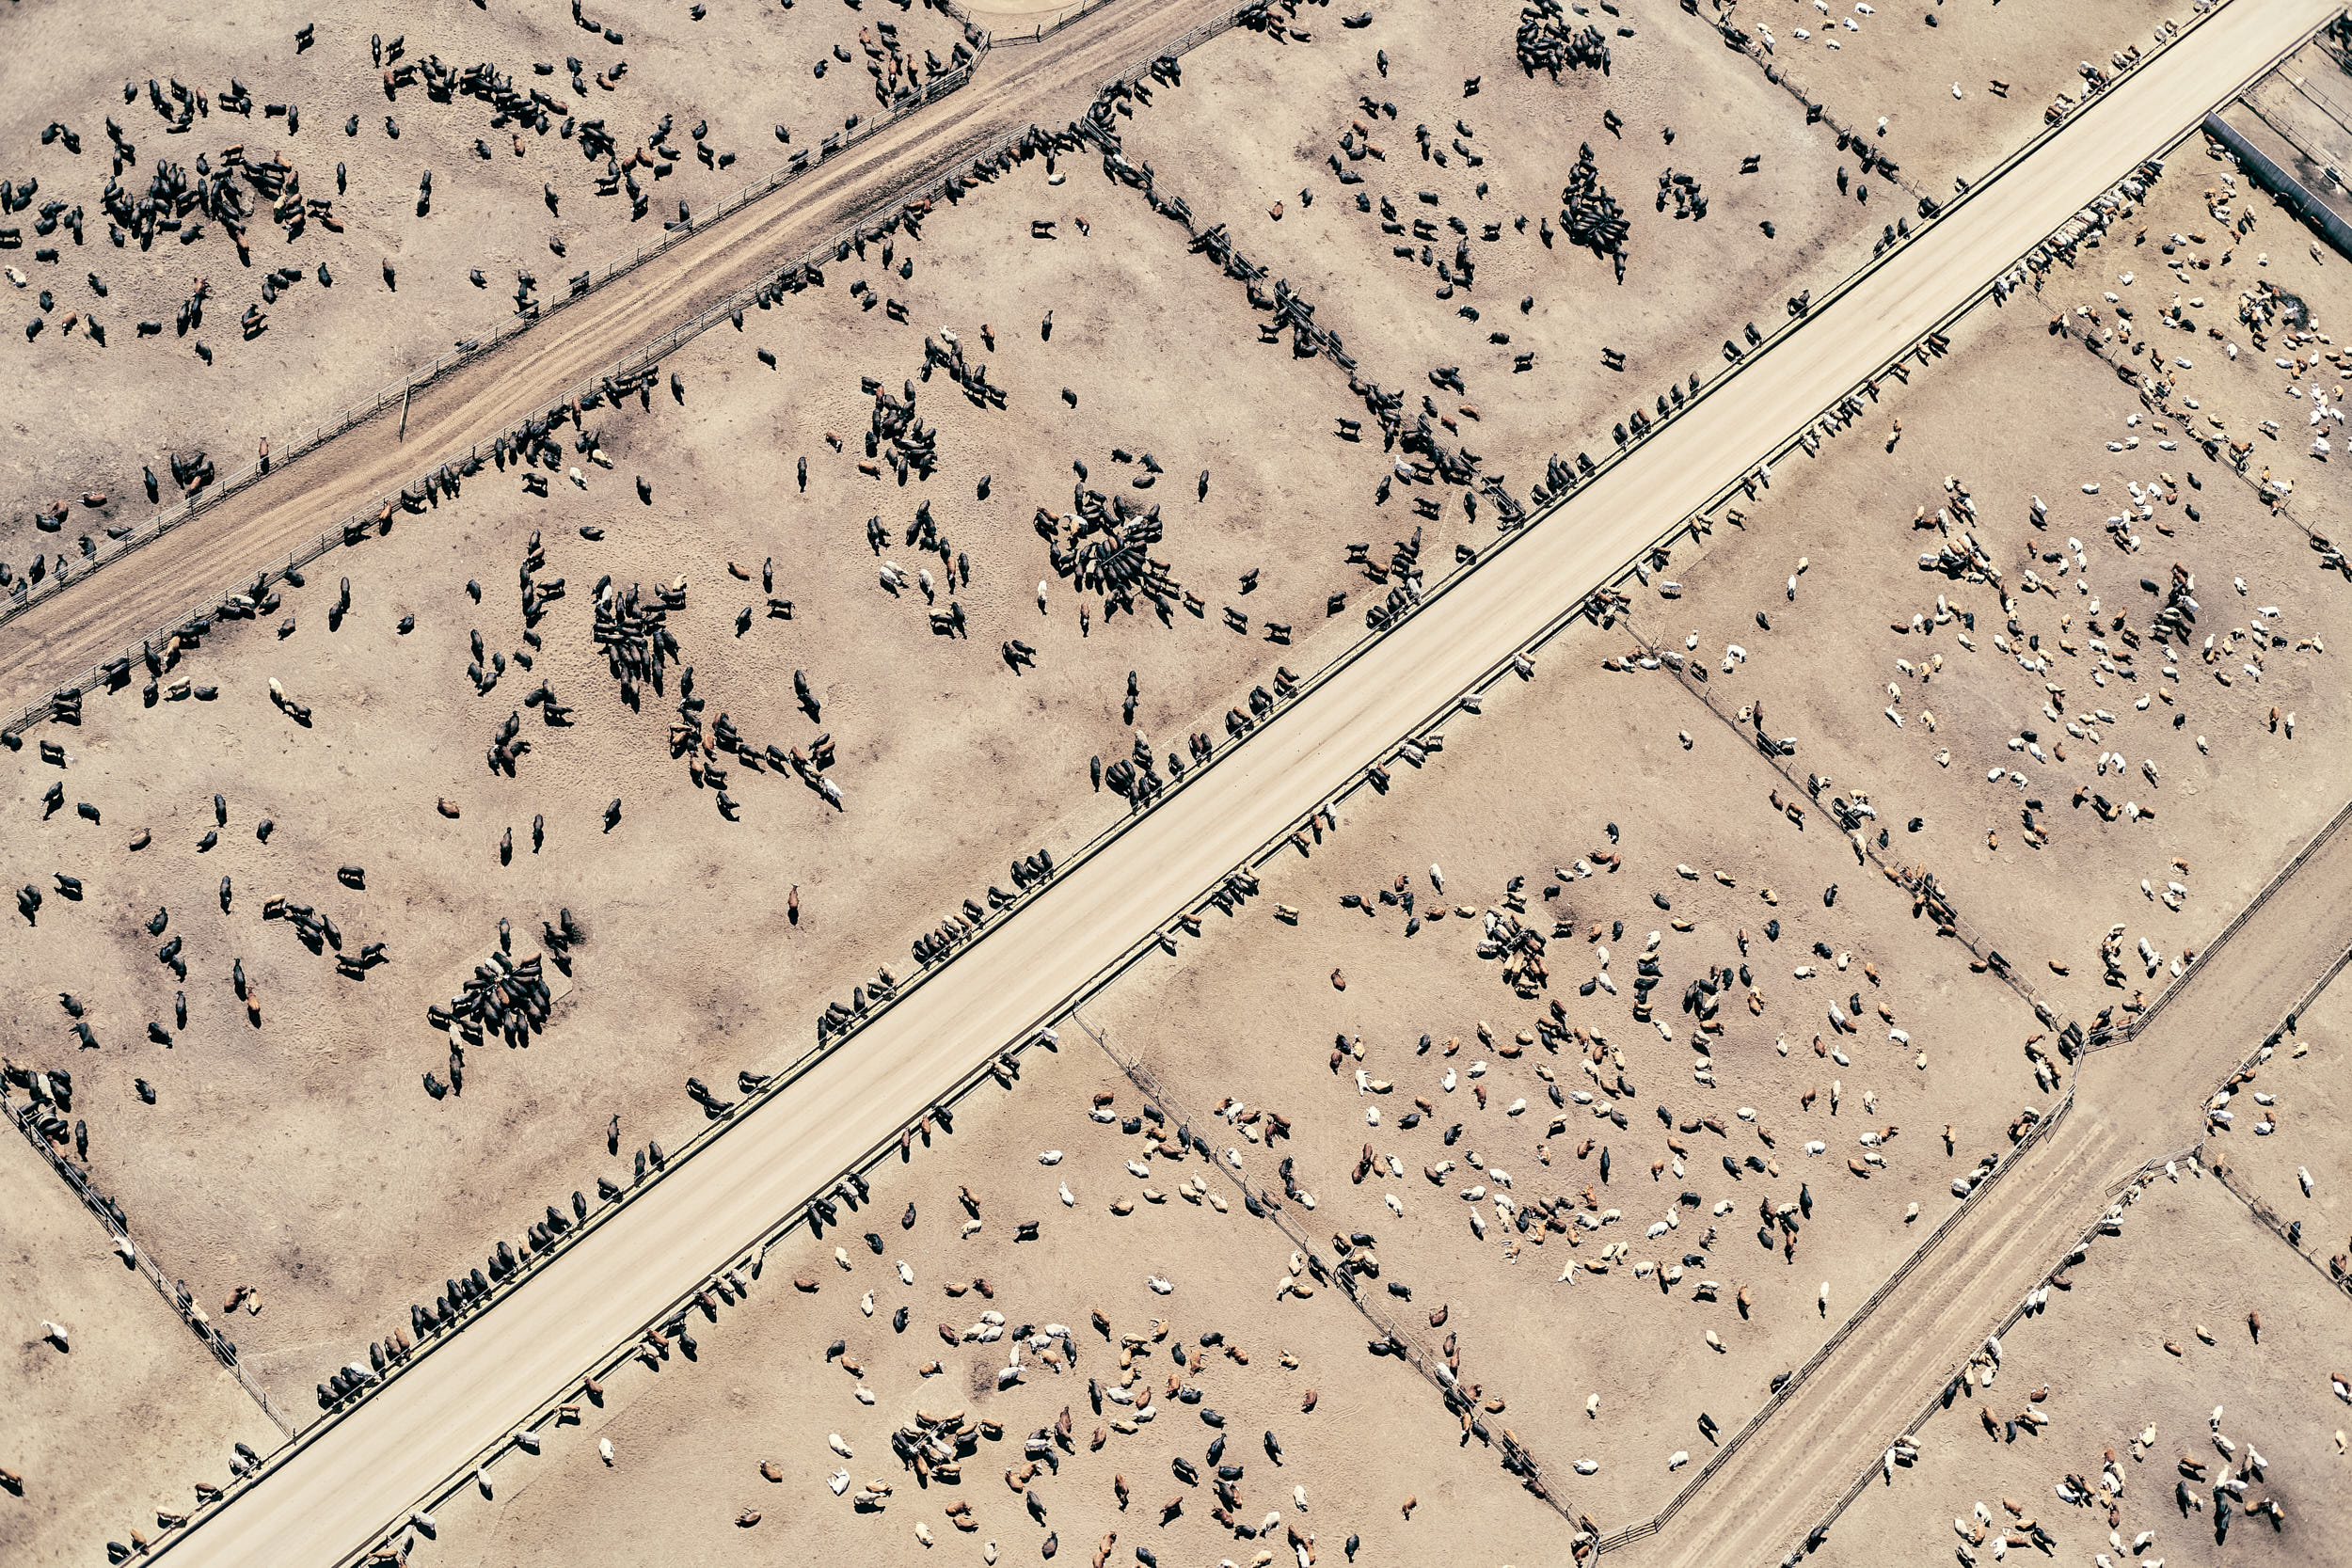  Aerial photograph of cattle pens in eastern Colorado, USA. Image is an outtake from a shoot for the Nature Conservancy.